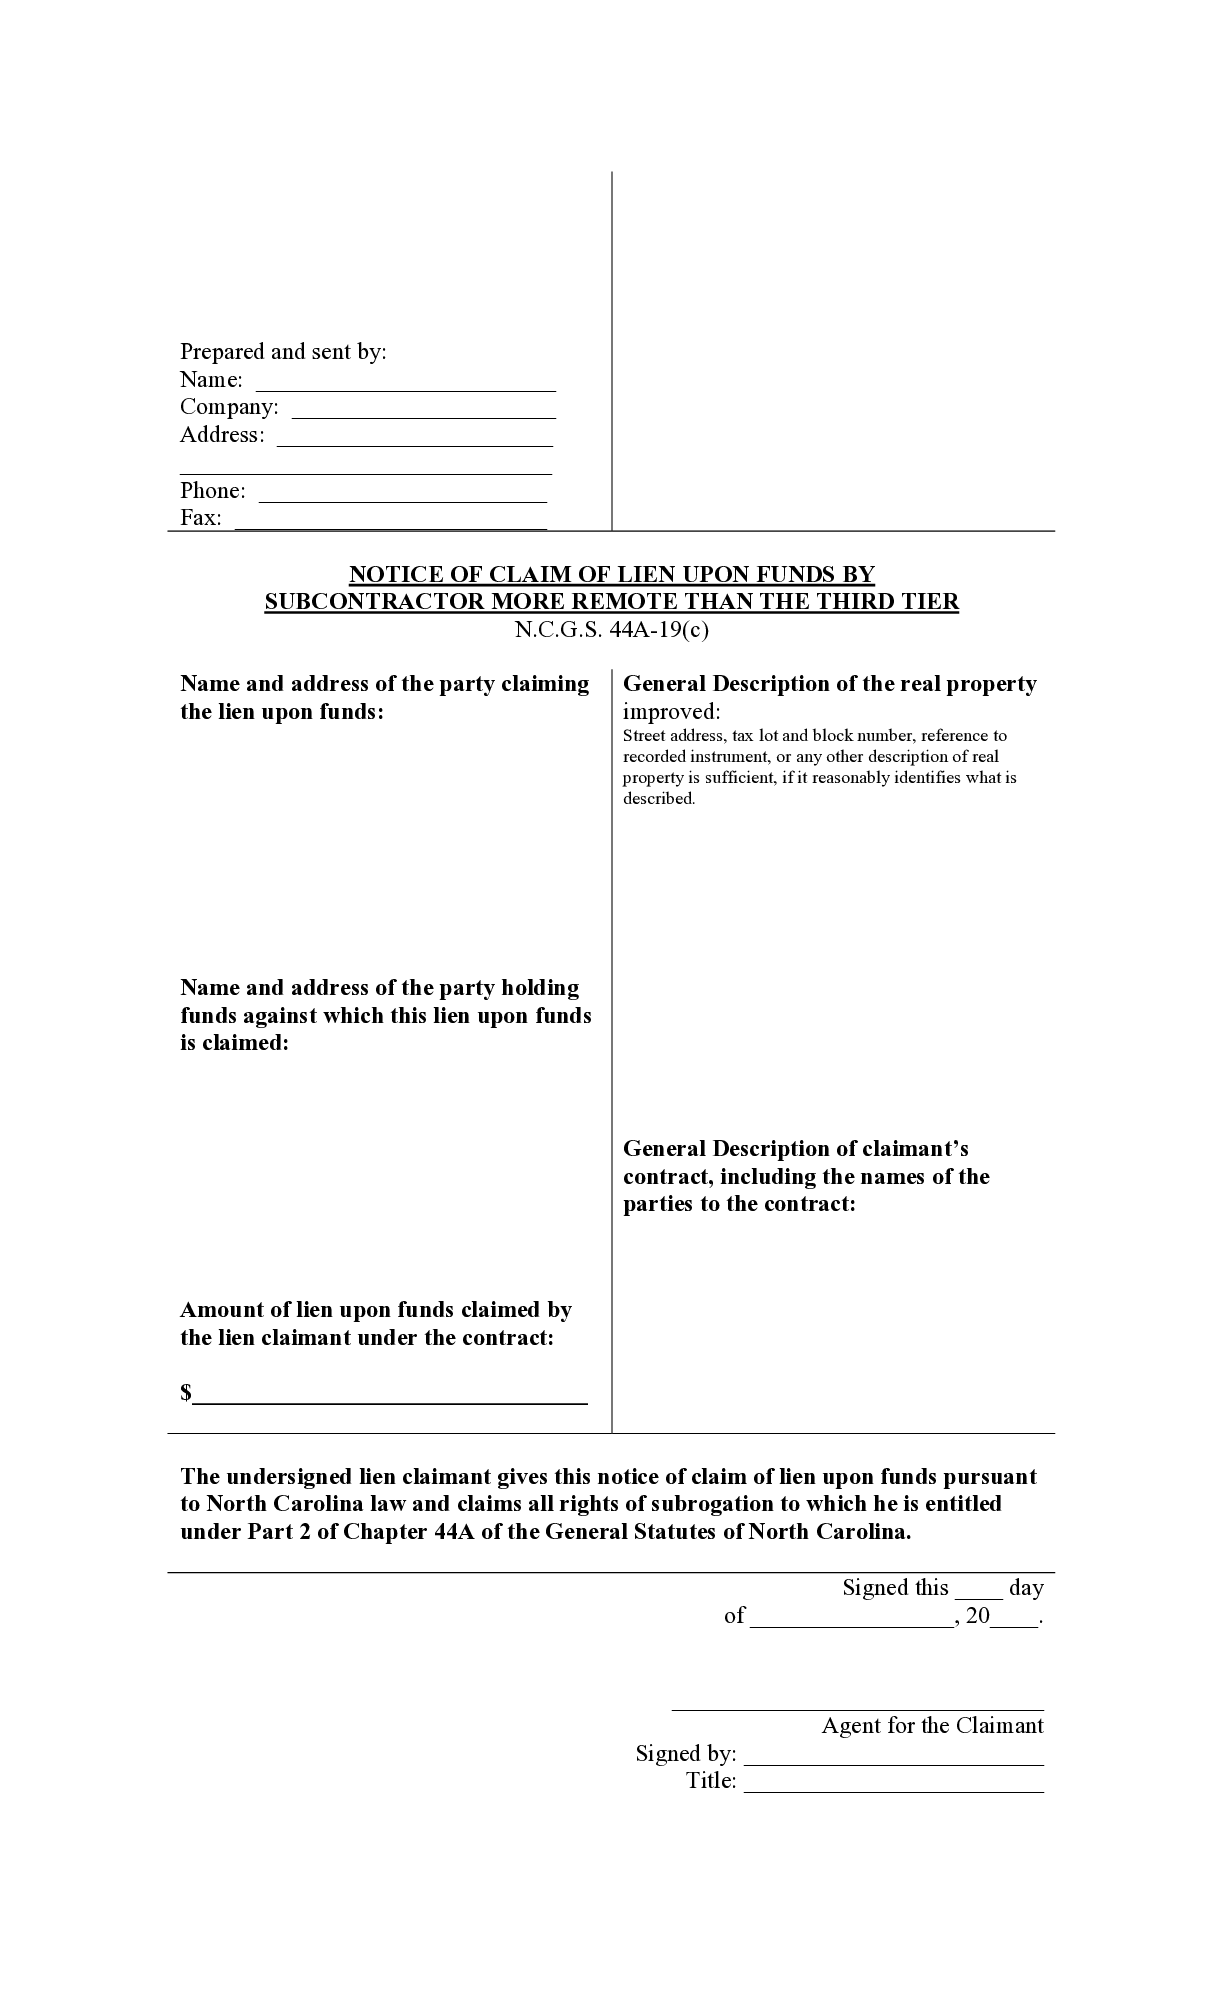 South Carolina 3rd Tier Notice of Lien Upon Funds Form - free from